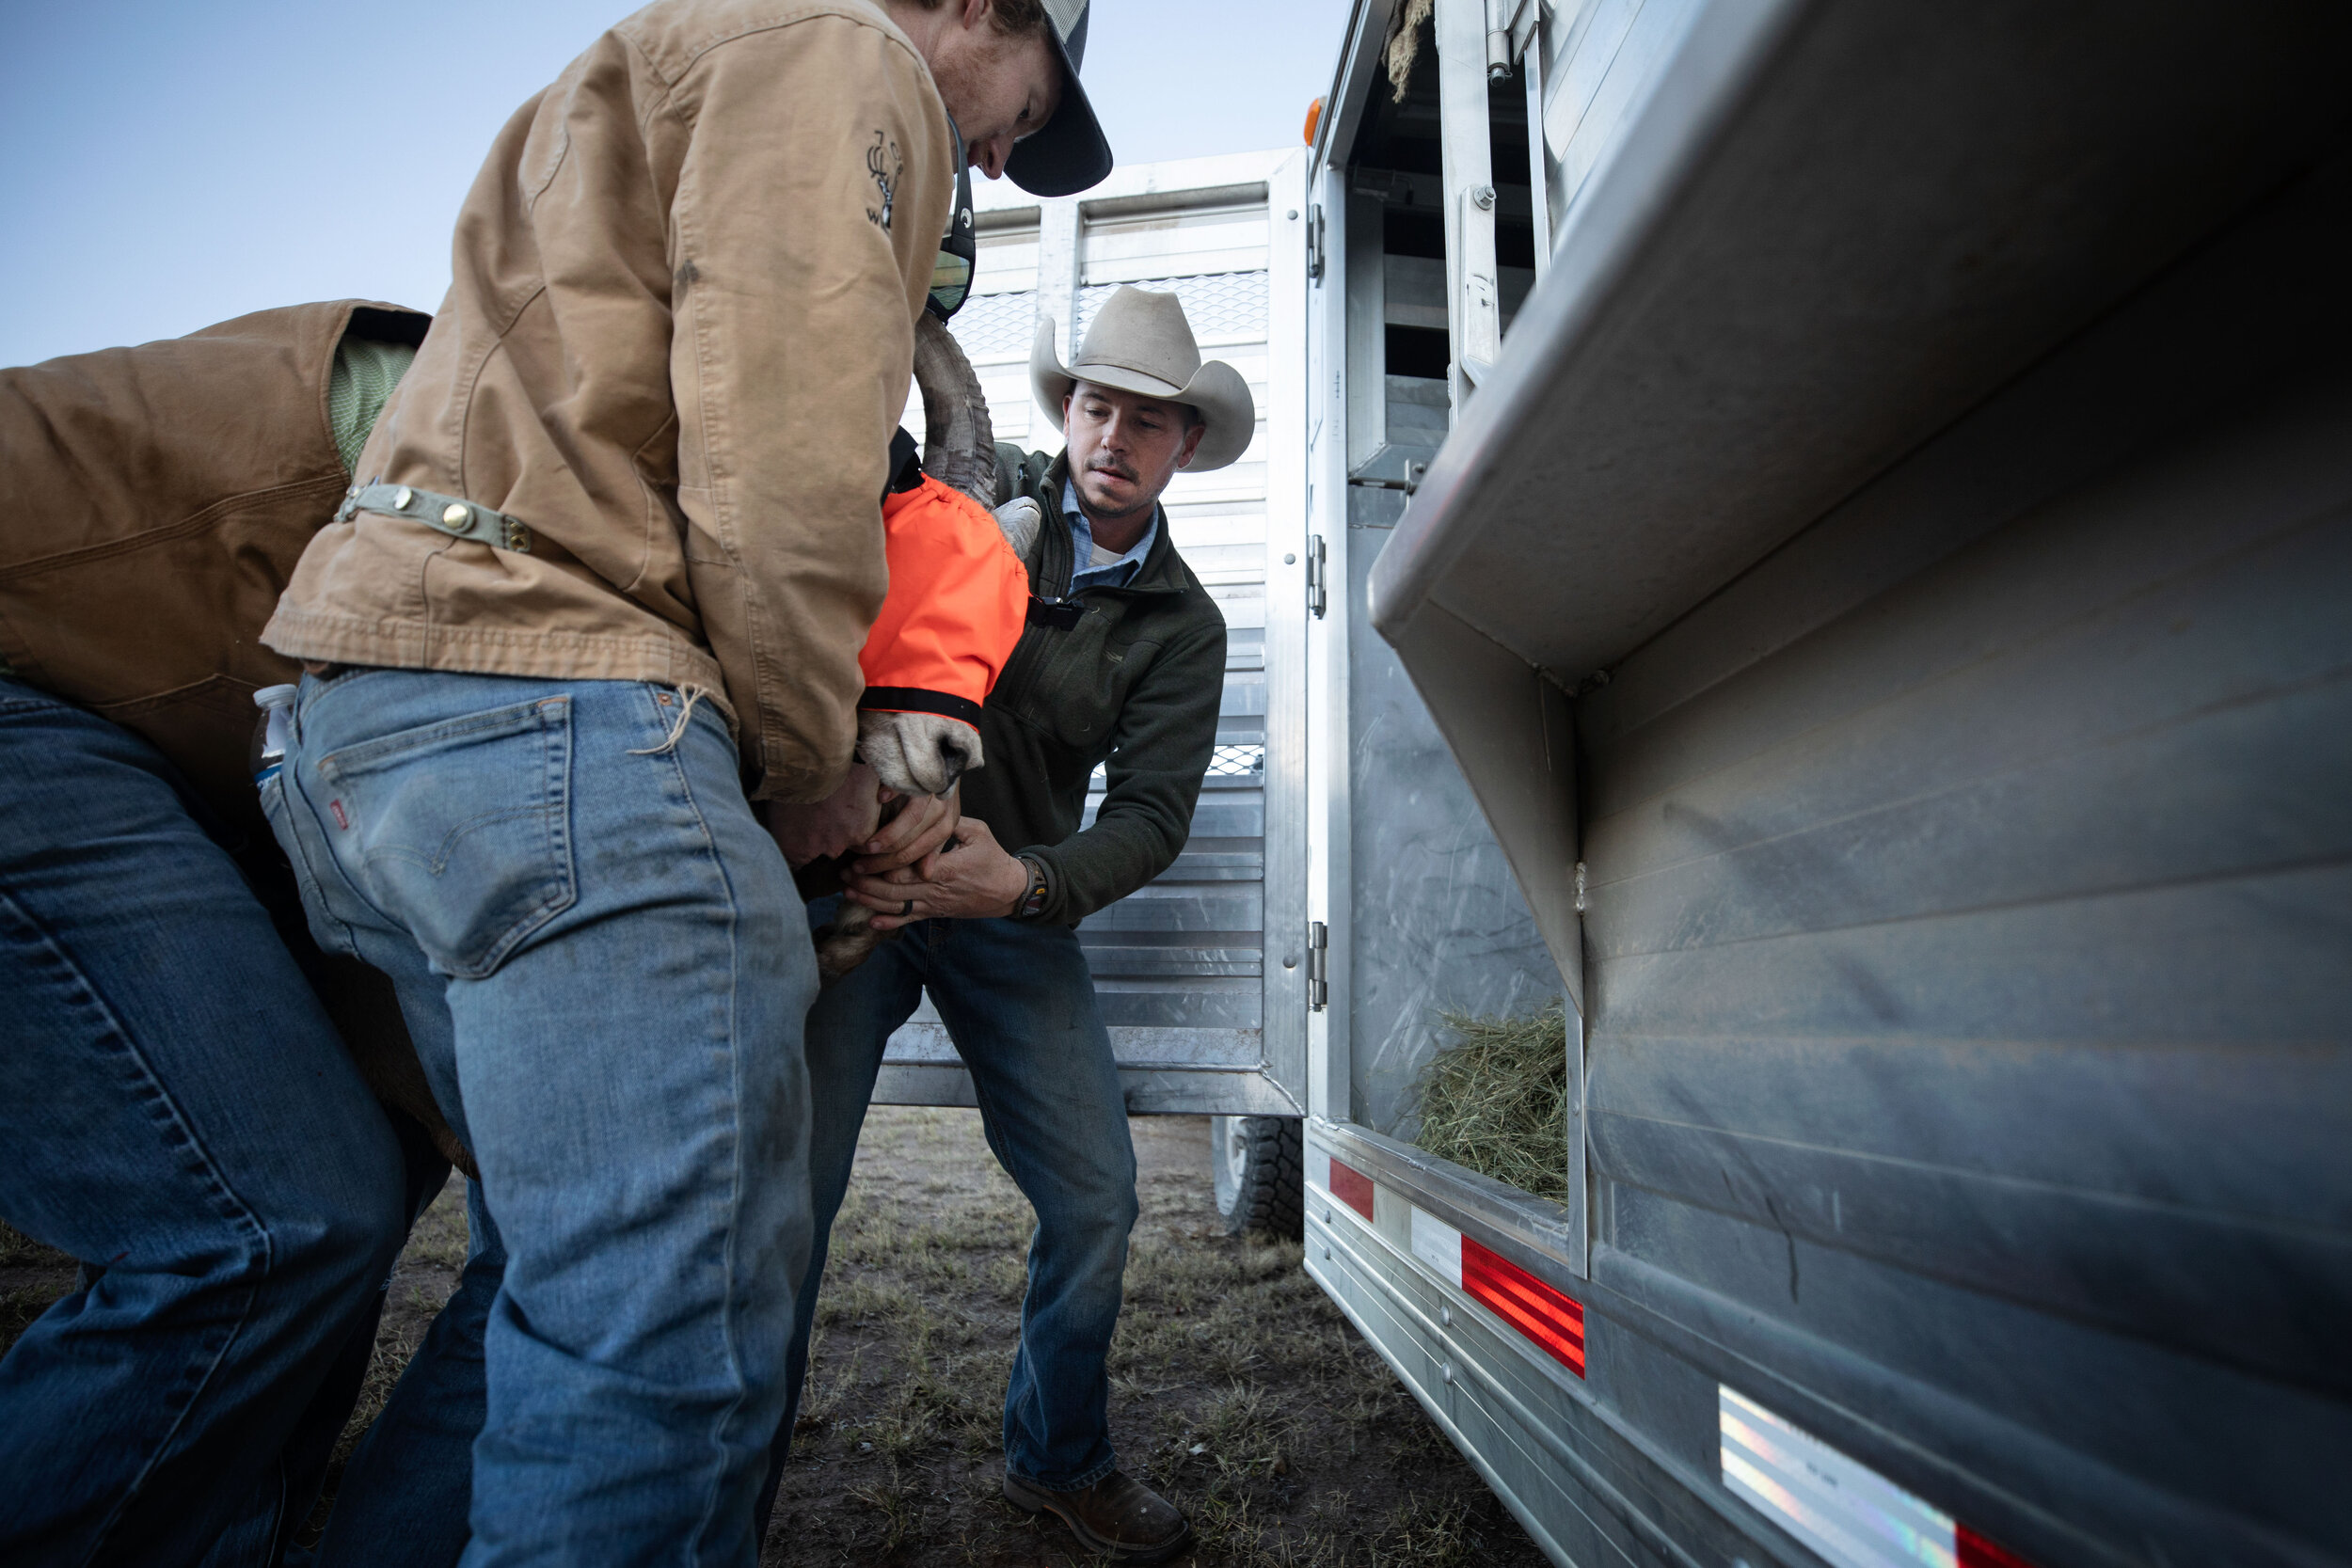  Volunteers lift a Desert Big Horn Sheep from the examination table to transport it to a trailer. After filling trailers with the sheep, TPWD transports them to Black Gap 100 miles away. 